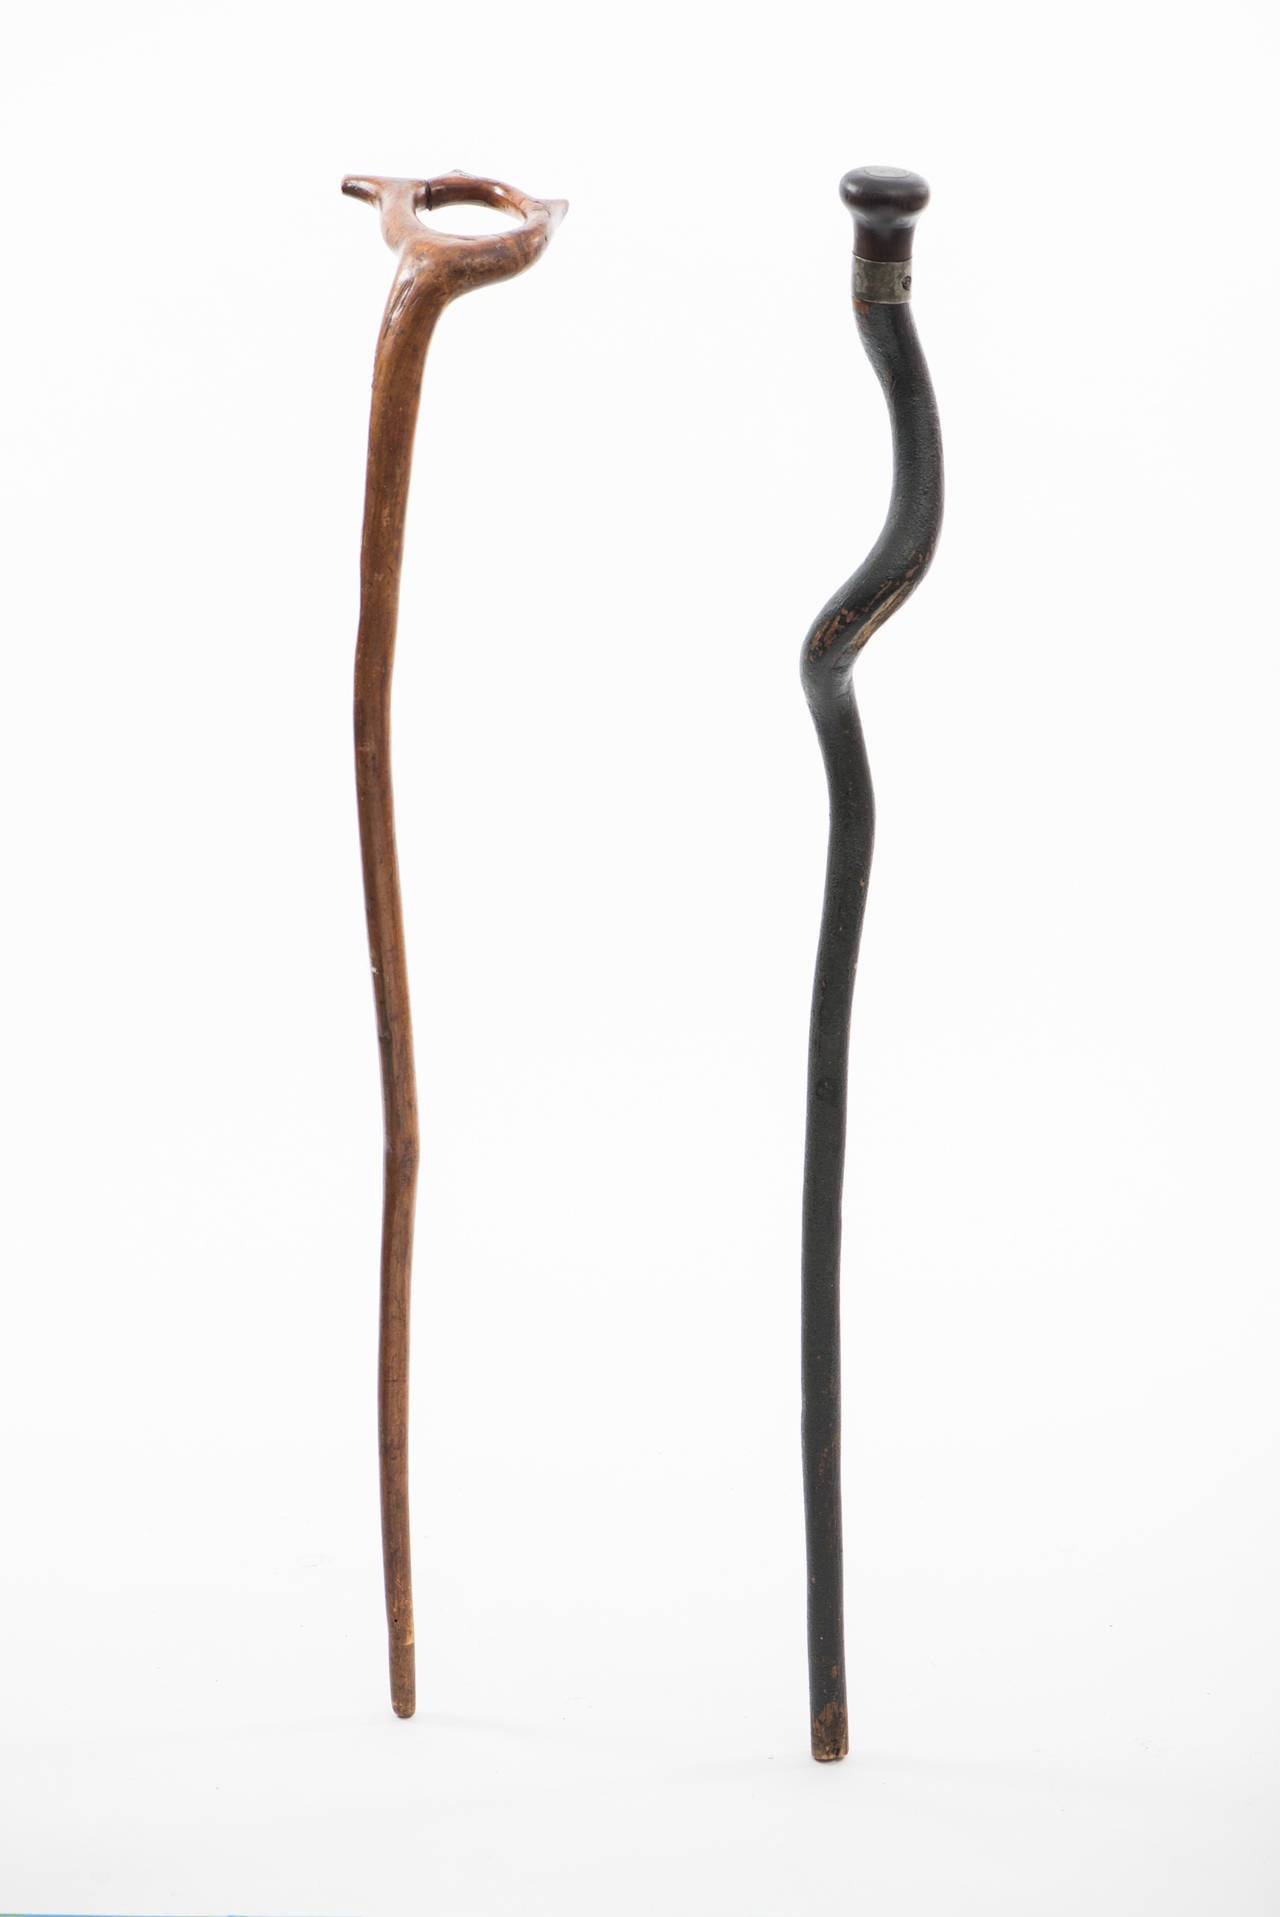 Iron Rustic Cane Group and Early Stand, 19th Century